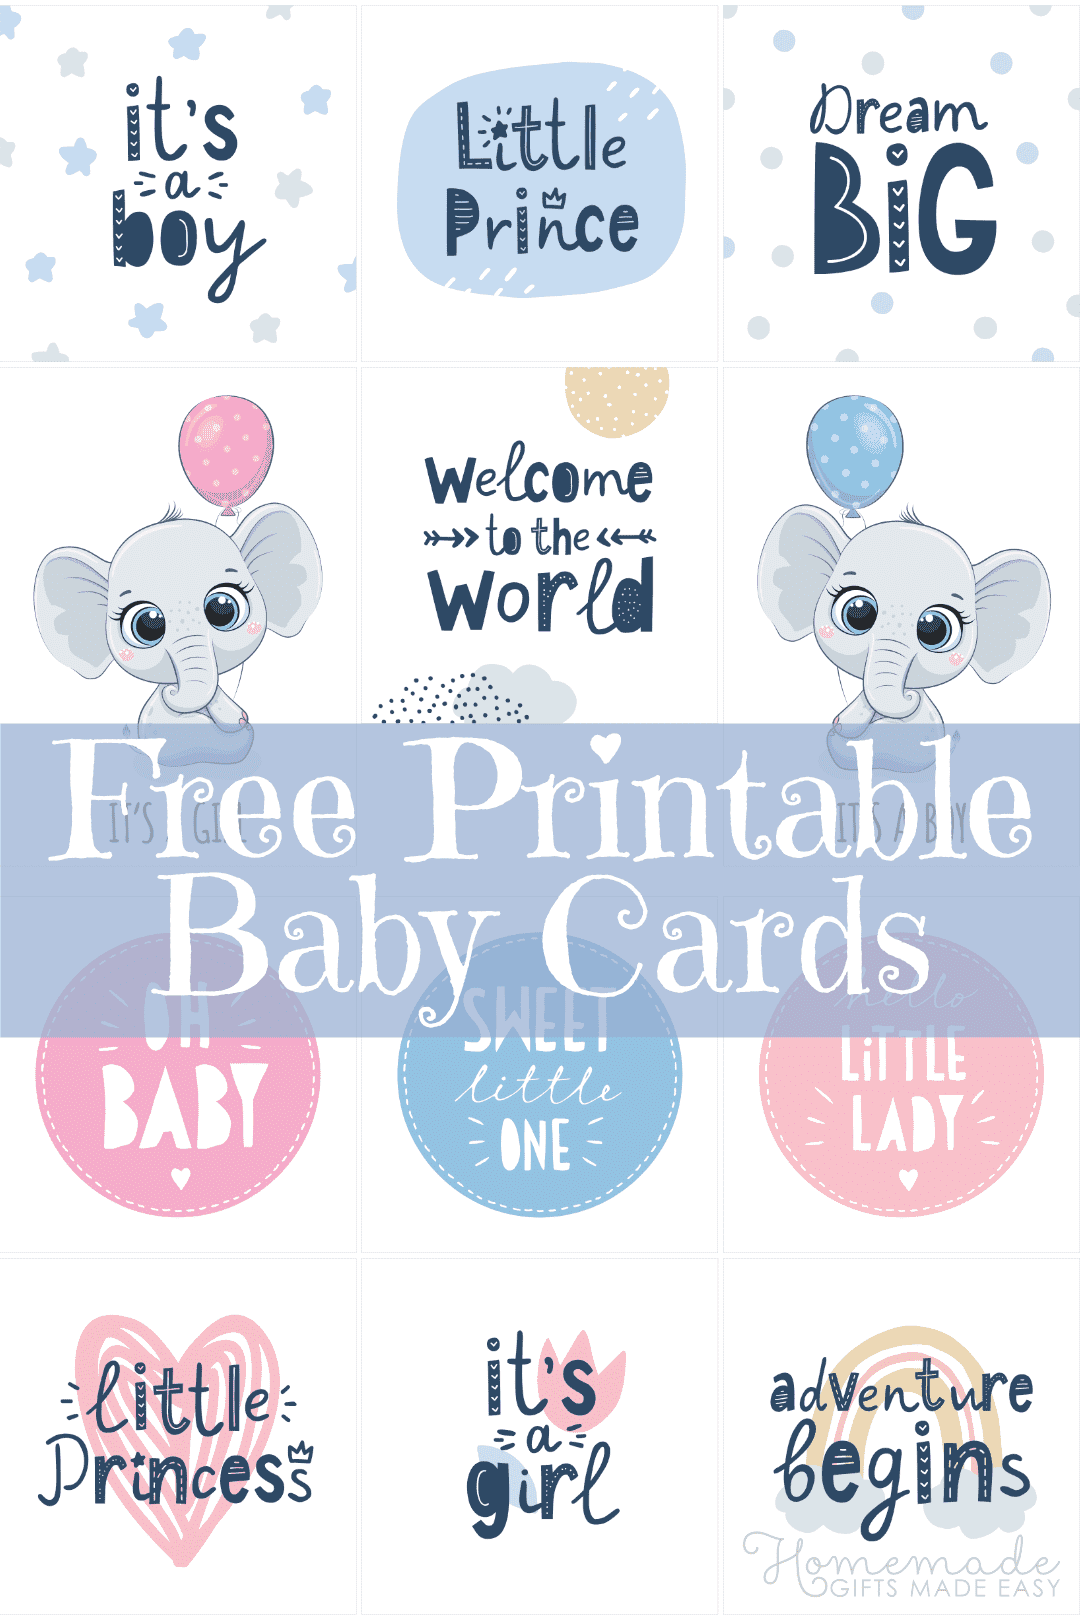 95 New Baby Wishes, Messages & Quotes to Write in a Card